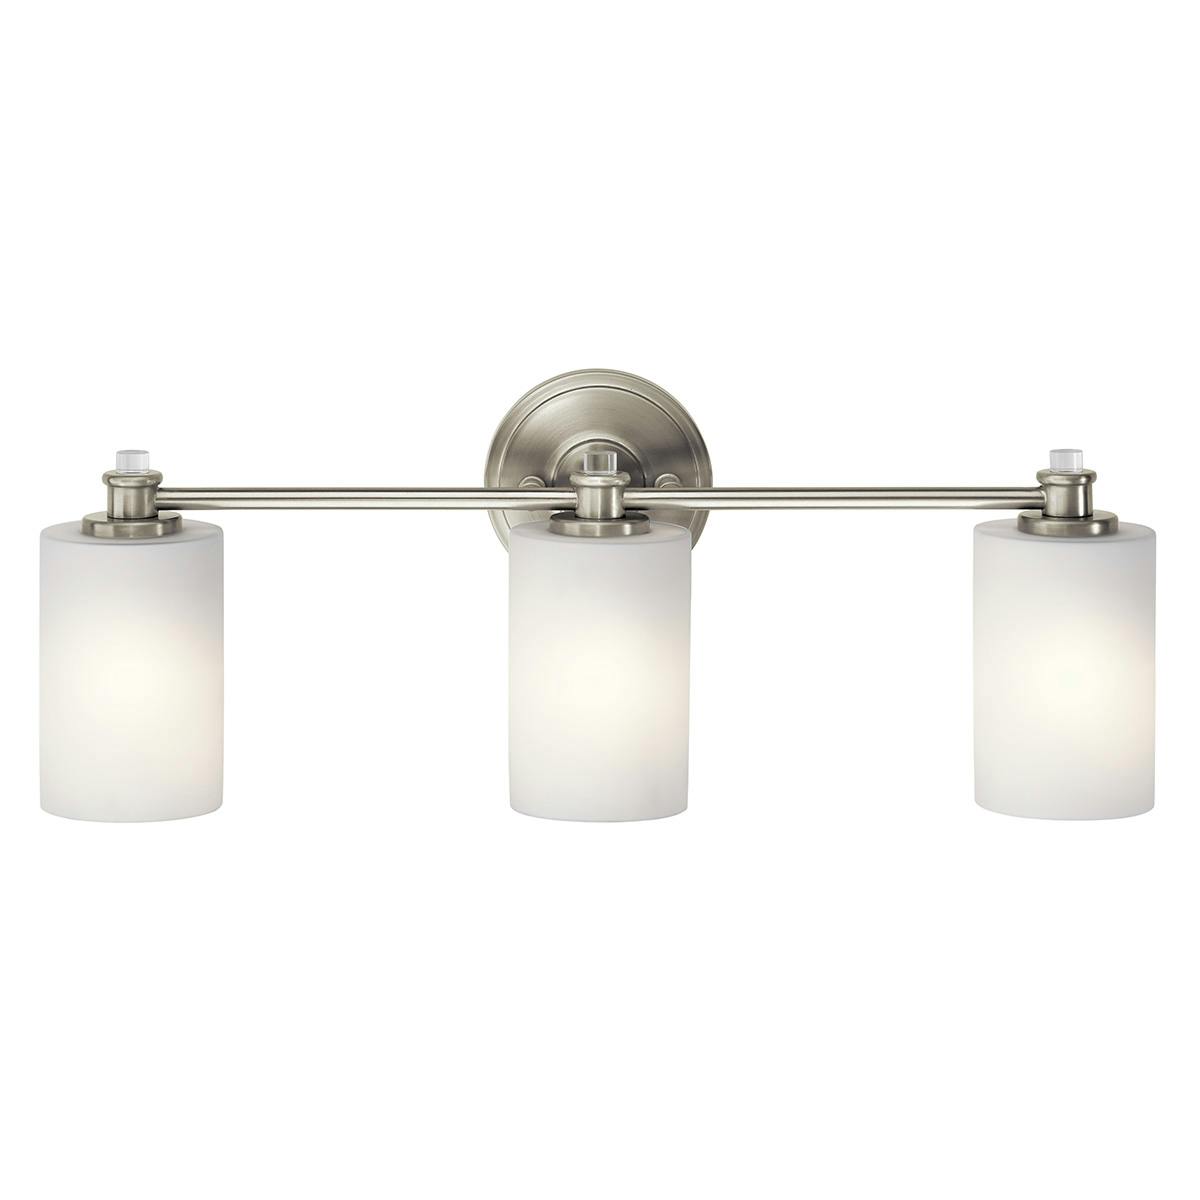 The Joelson 24" 3 Light Vanity Light Nickel facing down on a white background